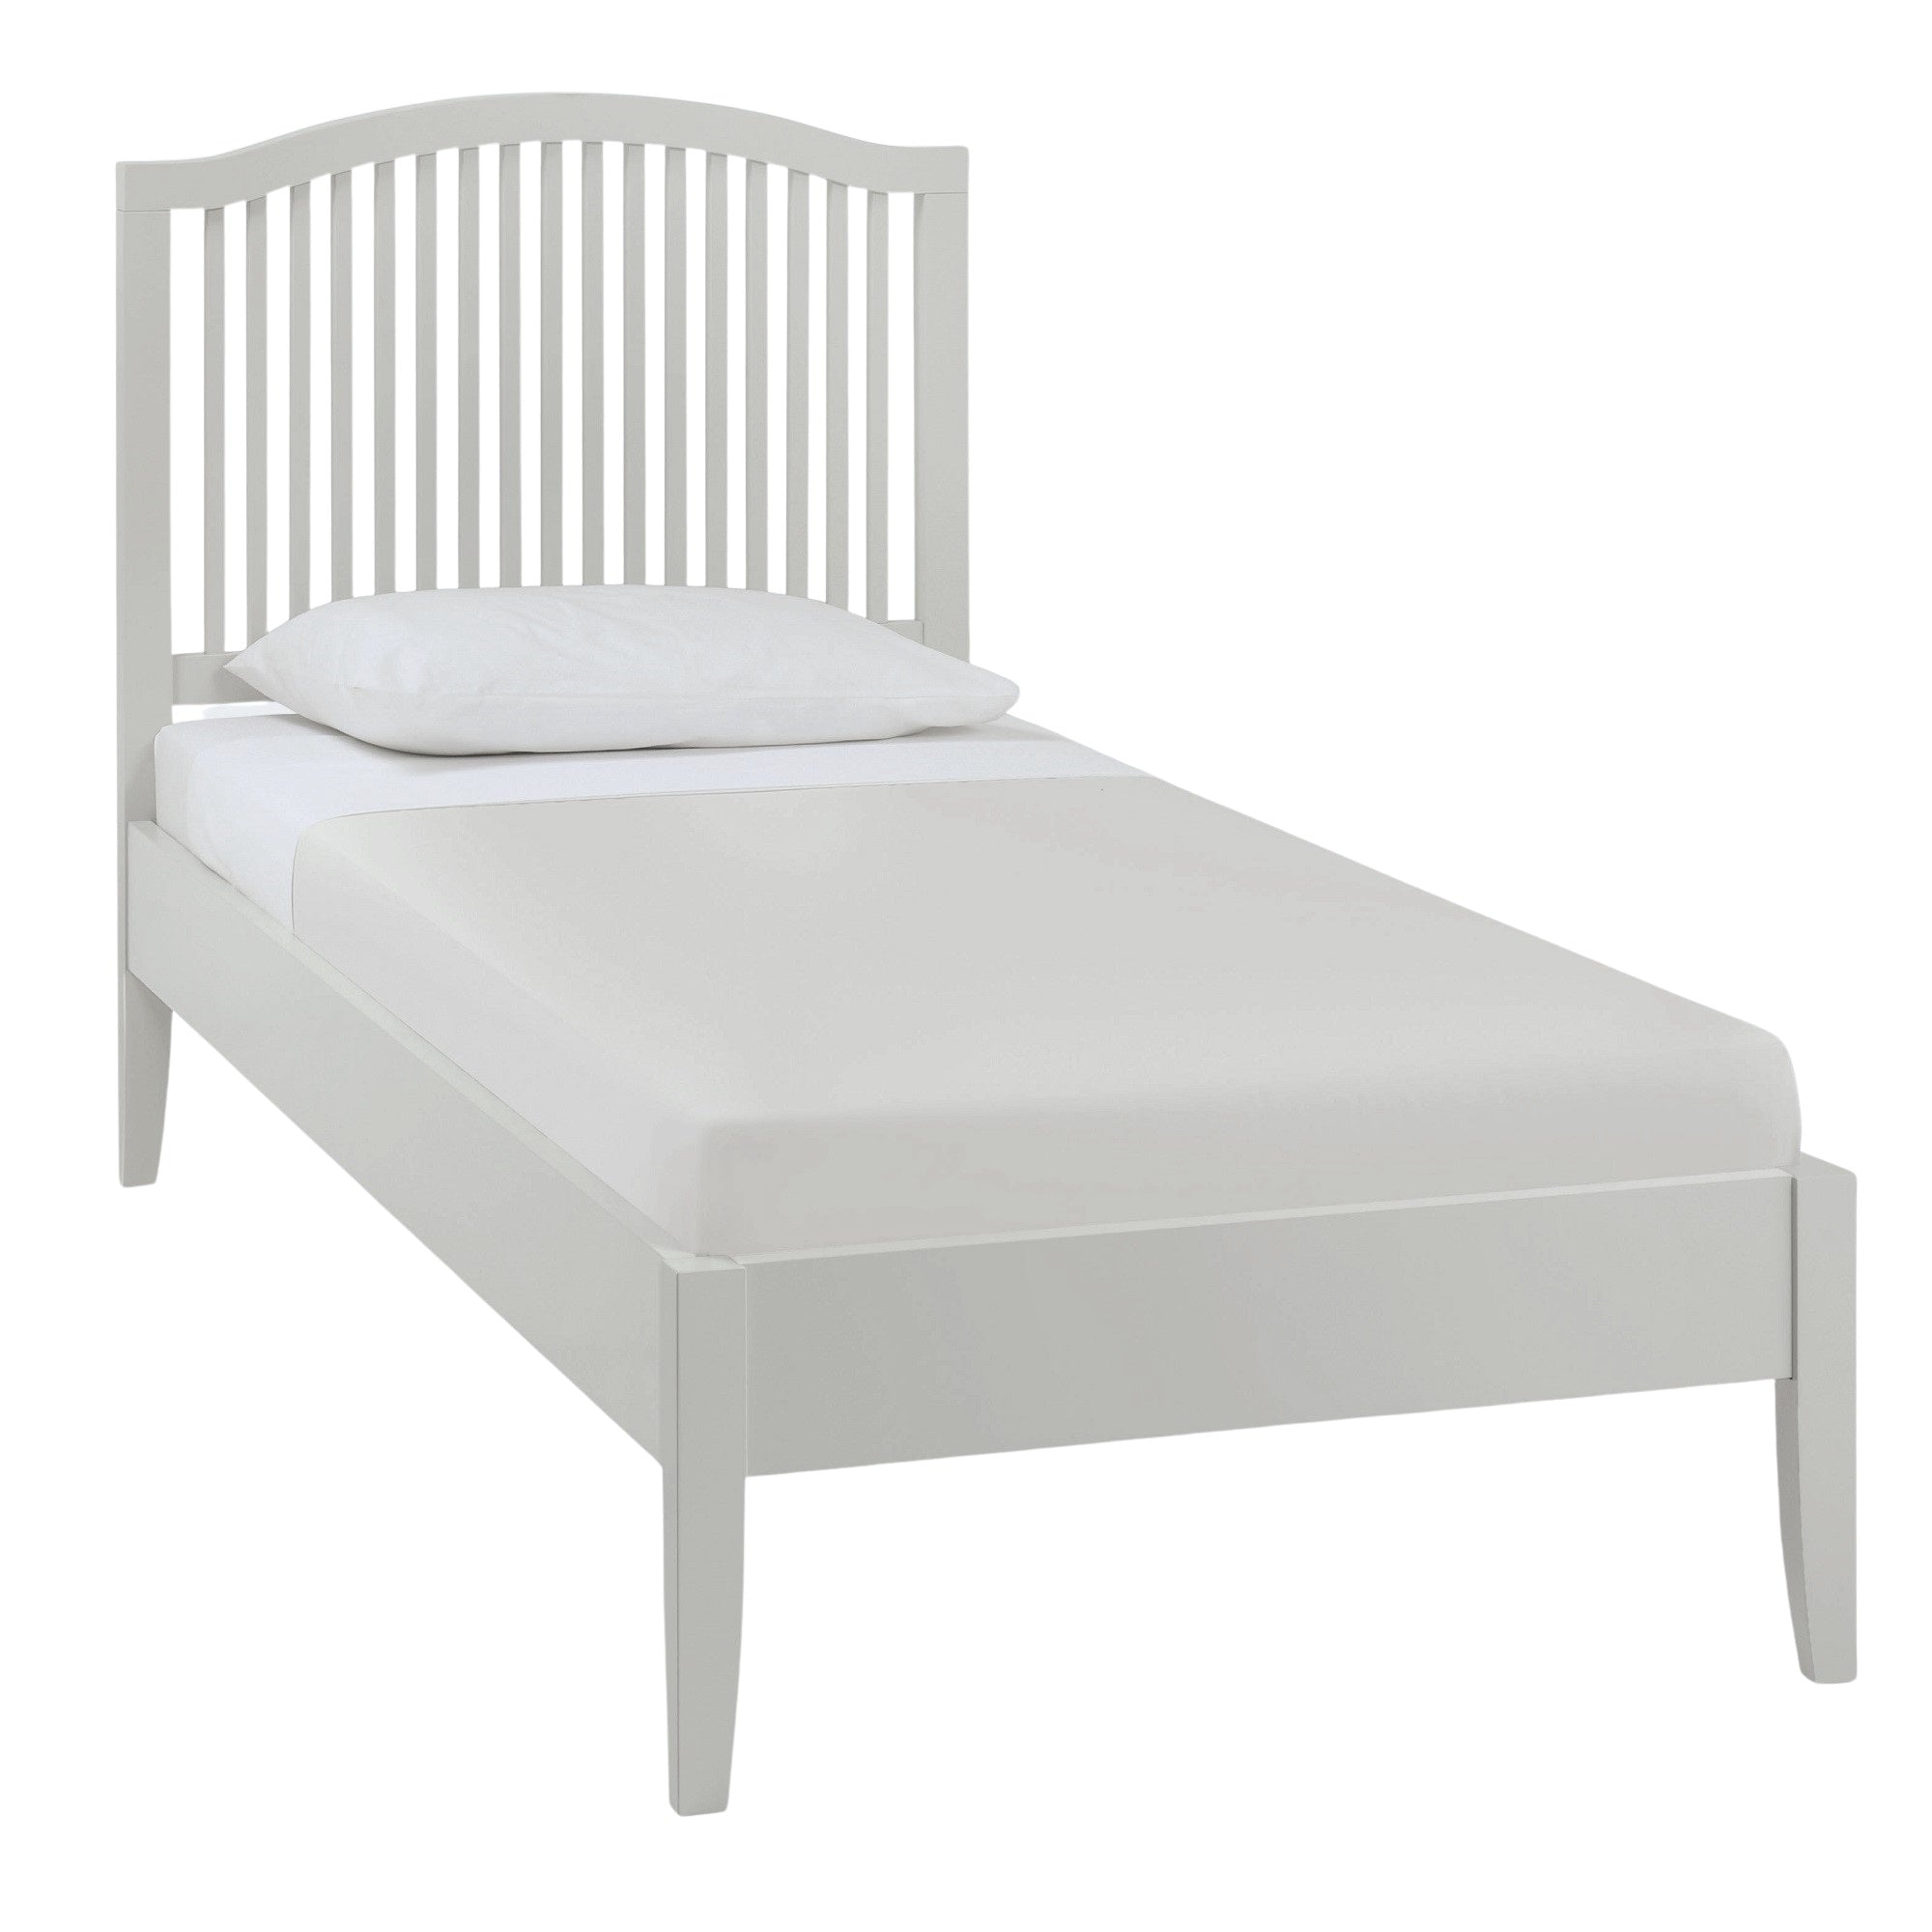 New Dover Grey Single Bed